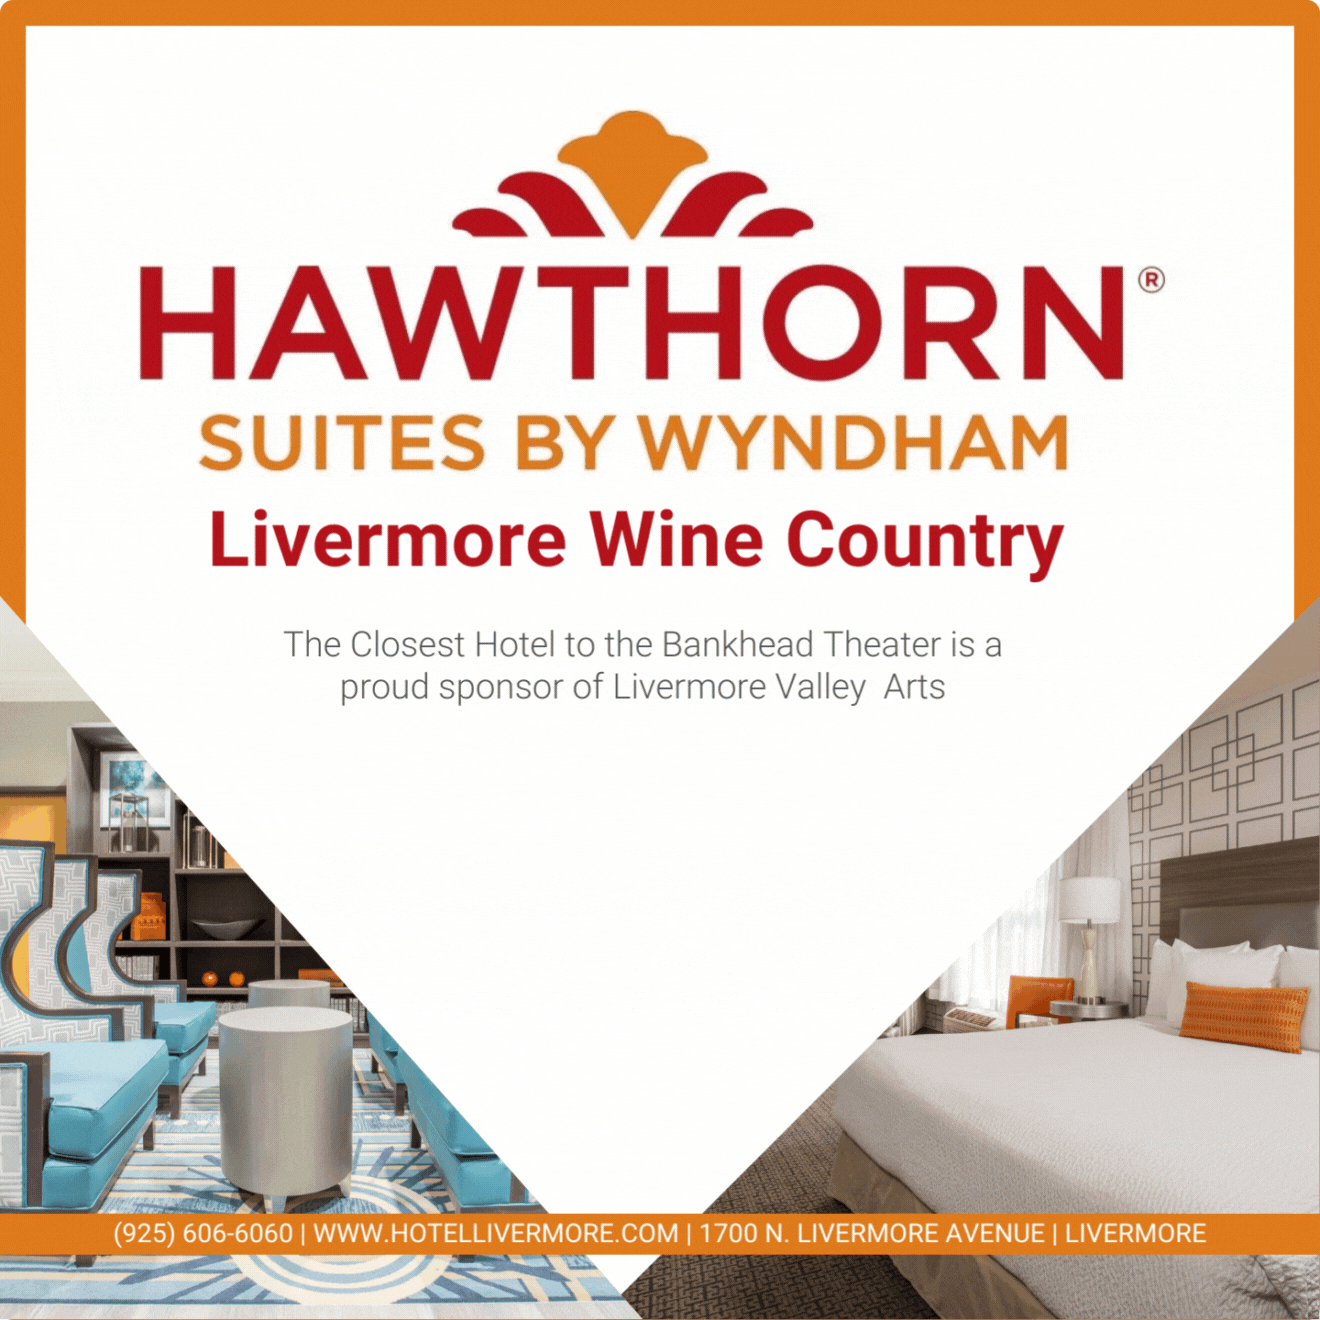 Hawthorn Suites Digital Program Ad. They collaborated with Livermore Valley Arts (LVA) many times and are one of LVA's Sponsors.